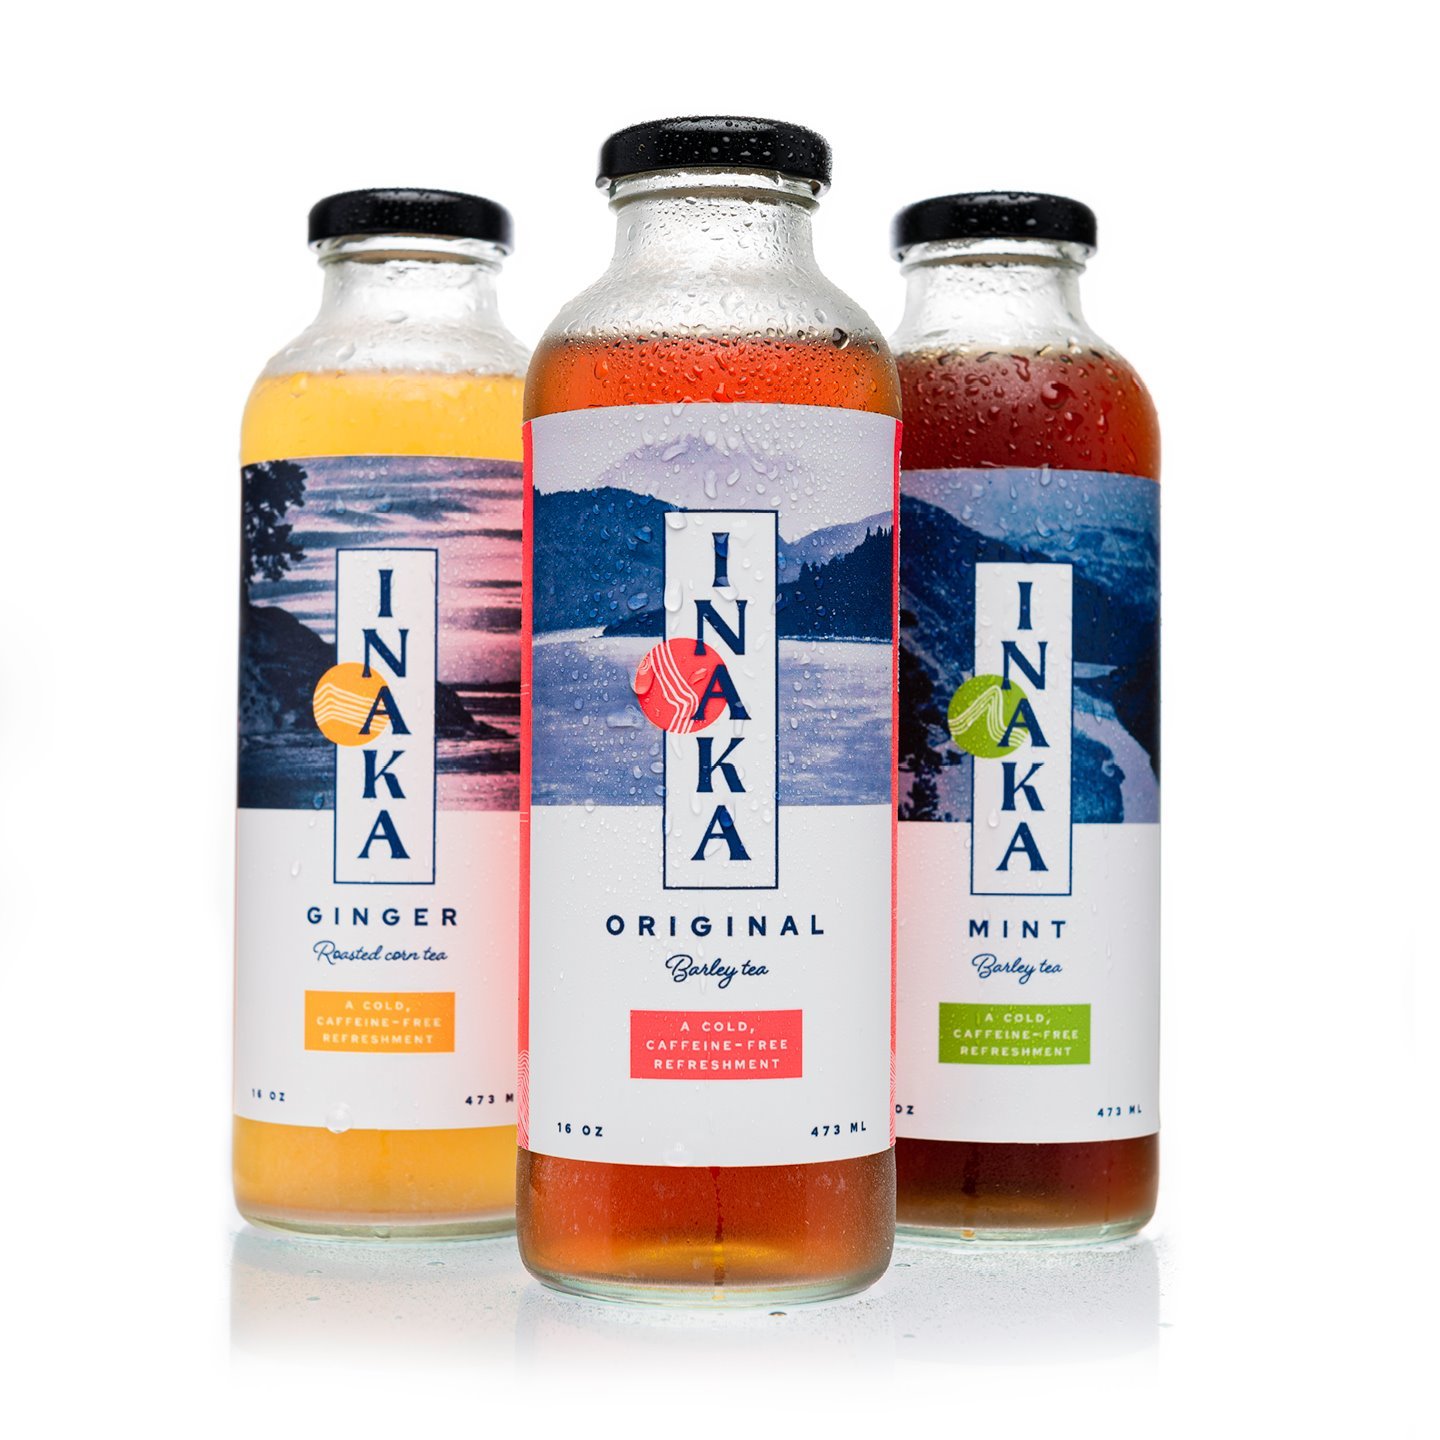 INAKA tea, now on Kroger shelves in 17 stores throughout the Southeast, including in Madison County where the product is stored and shipped from a warehouse.